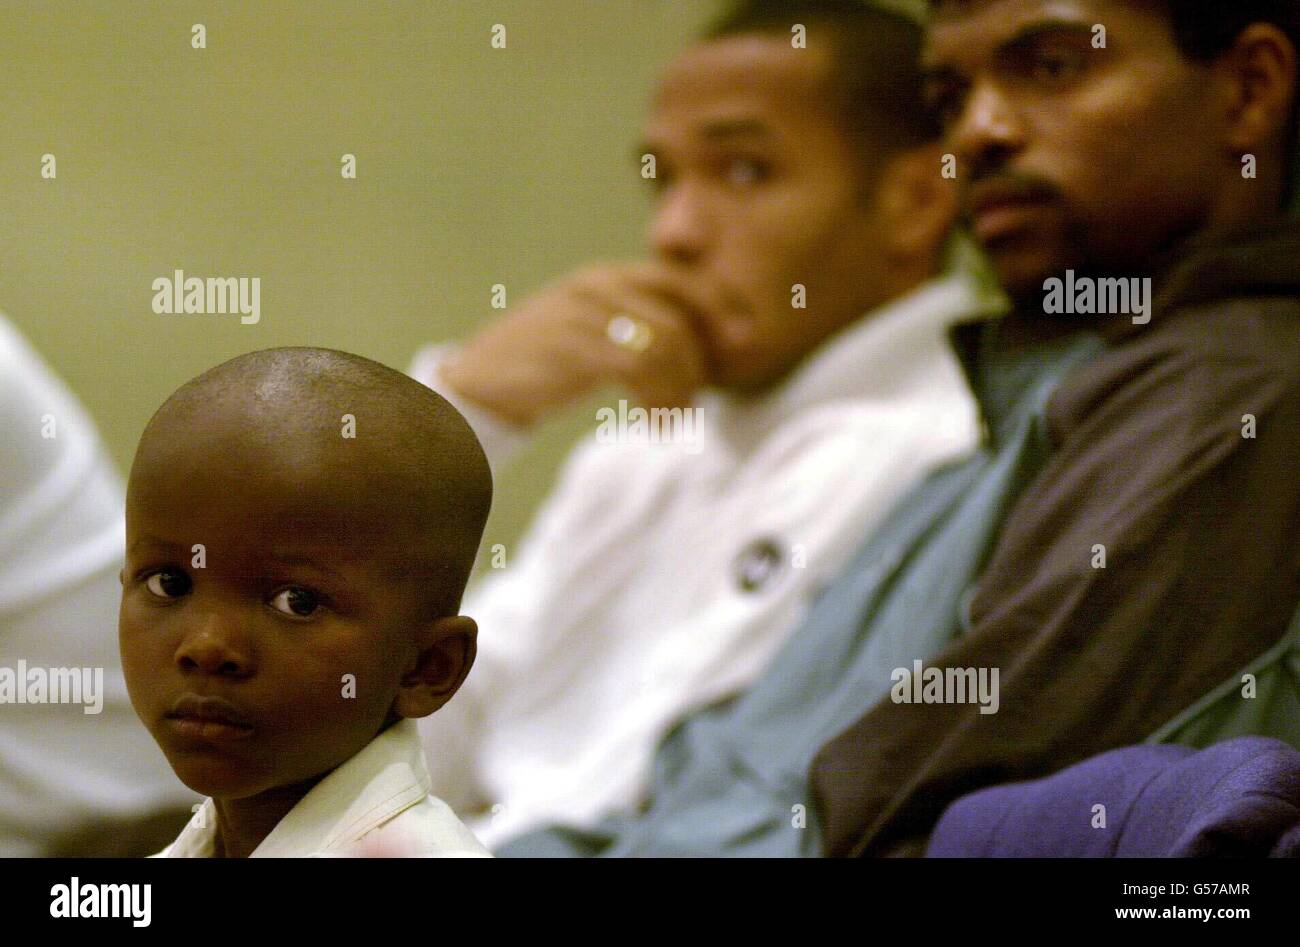 Arsenal soccer stars, Nwankwo Kanu (right) and Thierry Henry during a press conference in London to meet four-year-old Tofunmi Okude. Tofunmi was flown over from Nigeria for a livesaving heart operation, made possible through Kanu's Heart Foundation. Stock Photo